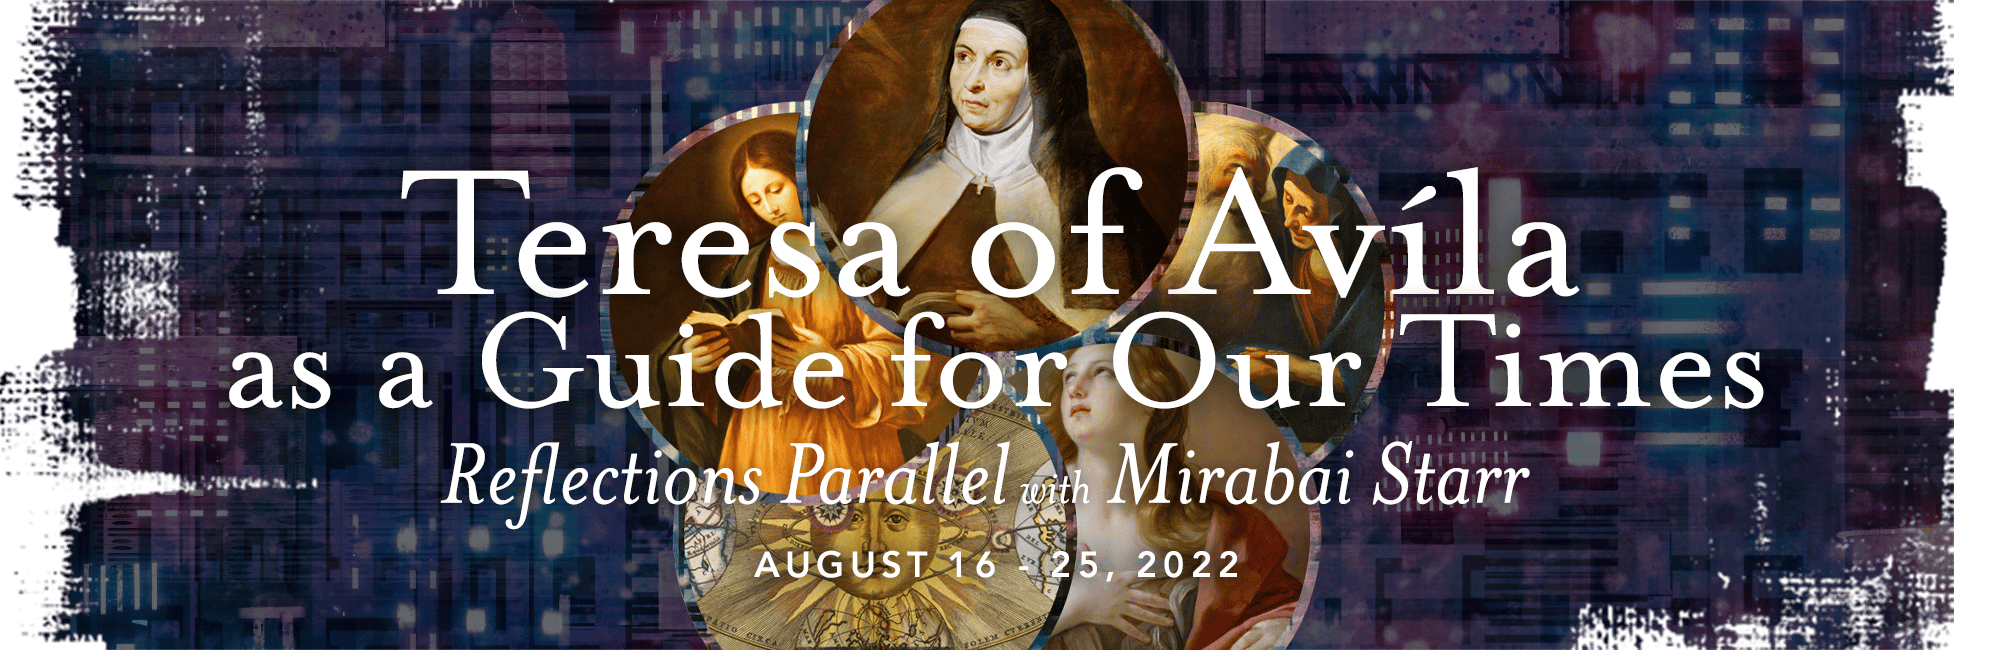 Teresa of Avila as a Guide for our Times - Reflections Parallel with Mirabai Starr